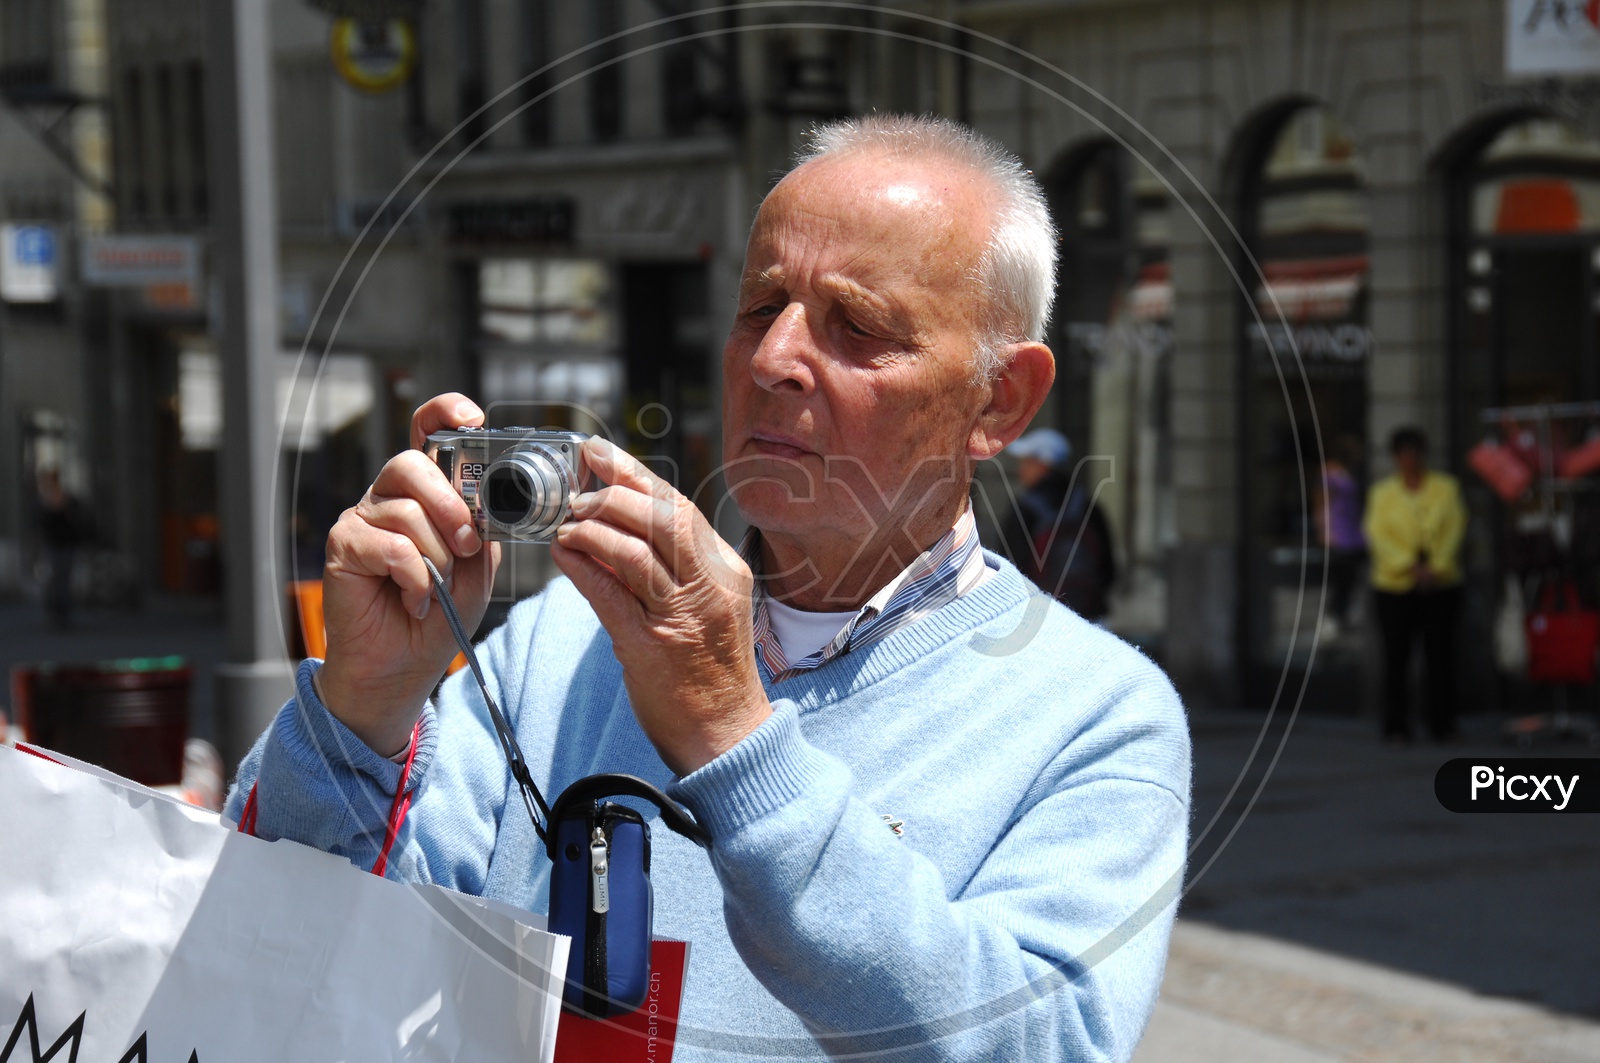 An old man clicking pictures with a camera on the street